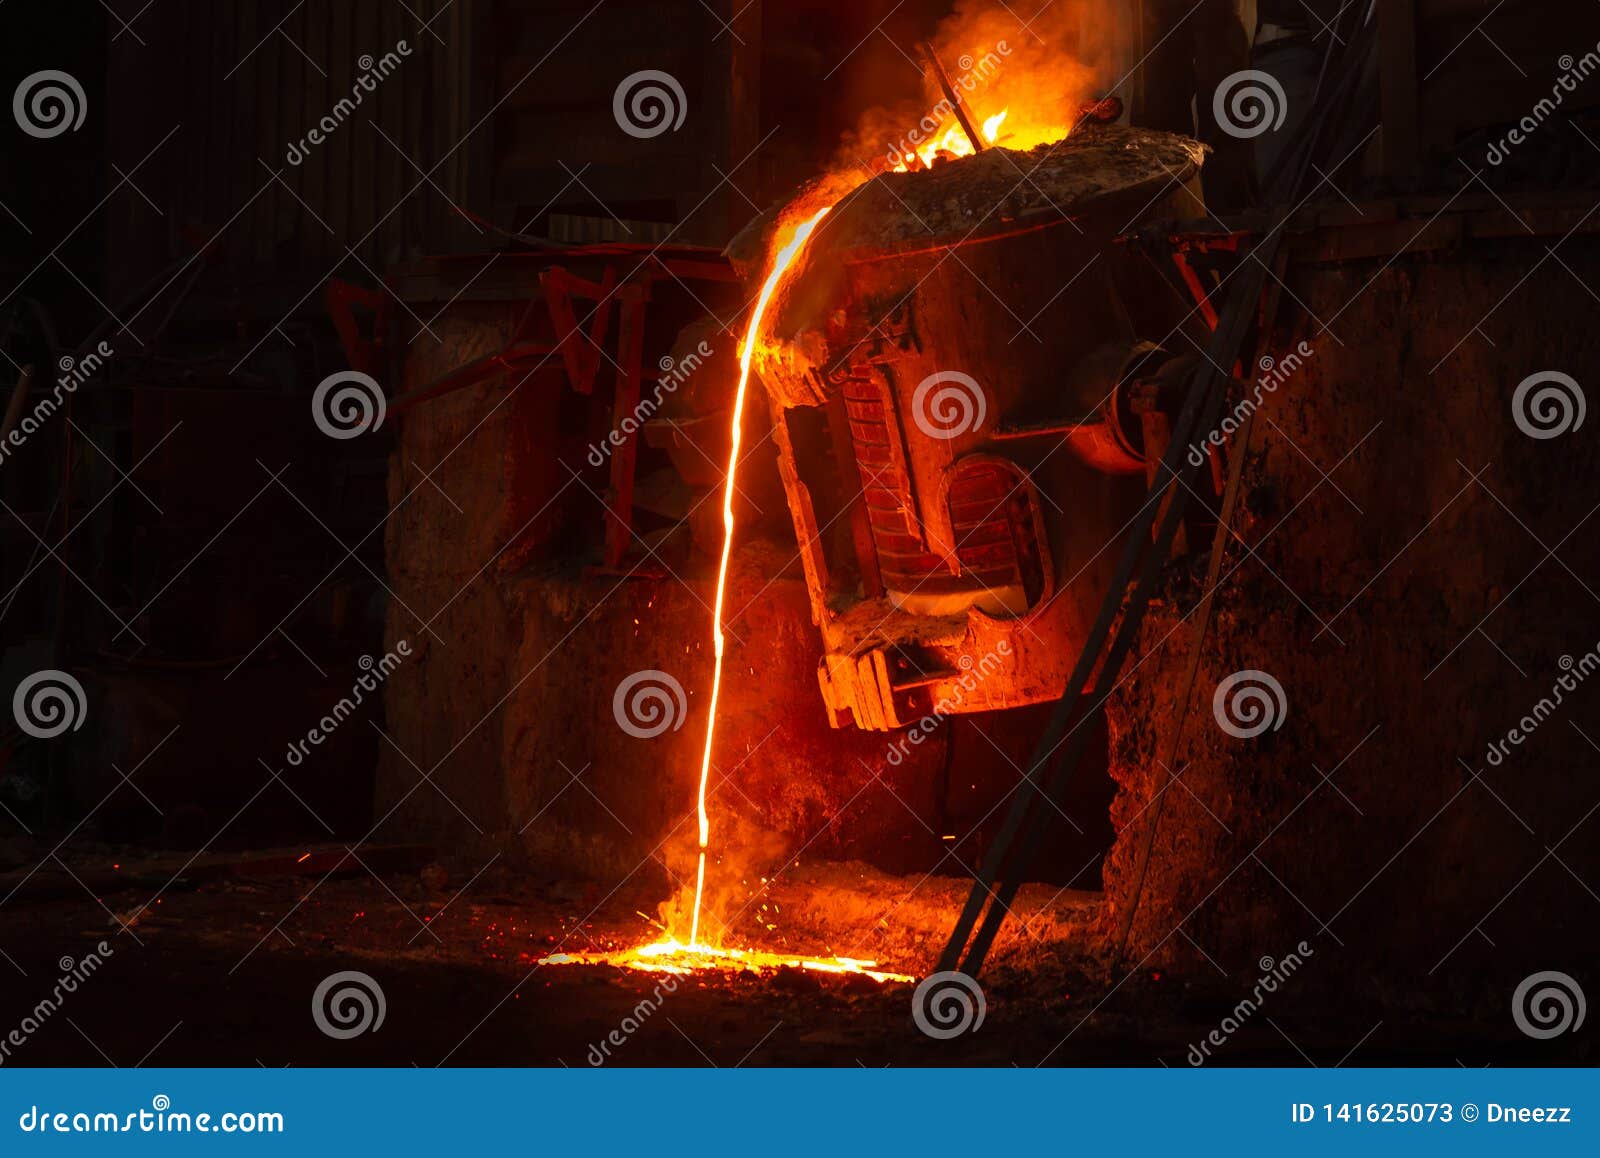 very hot metal casting in a old steel factory